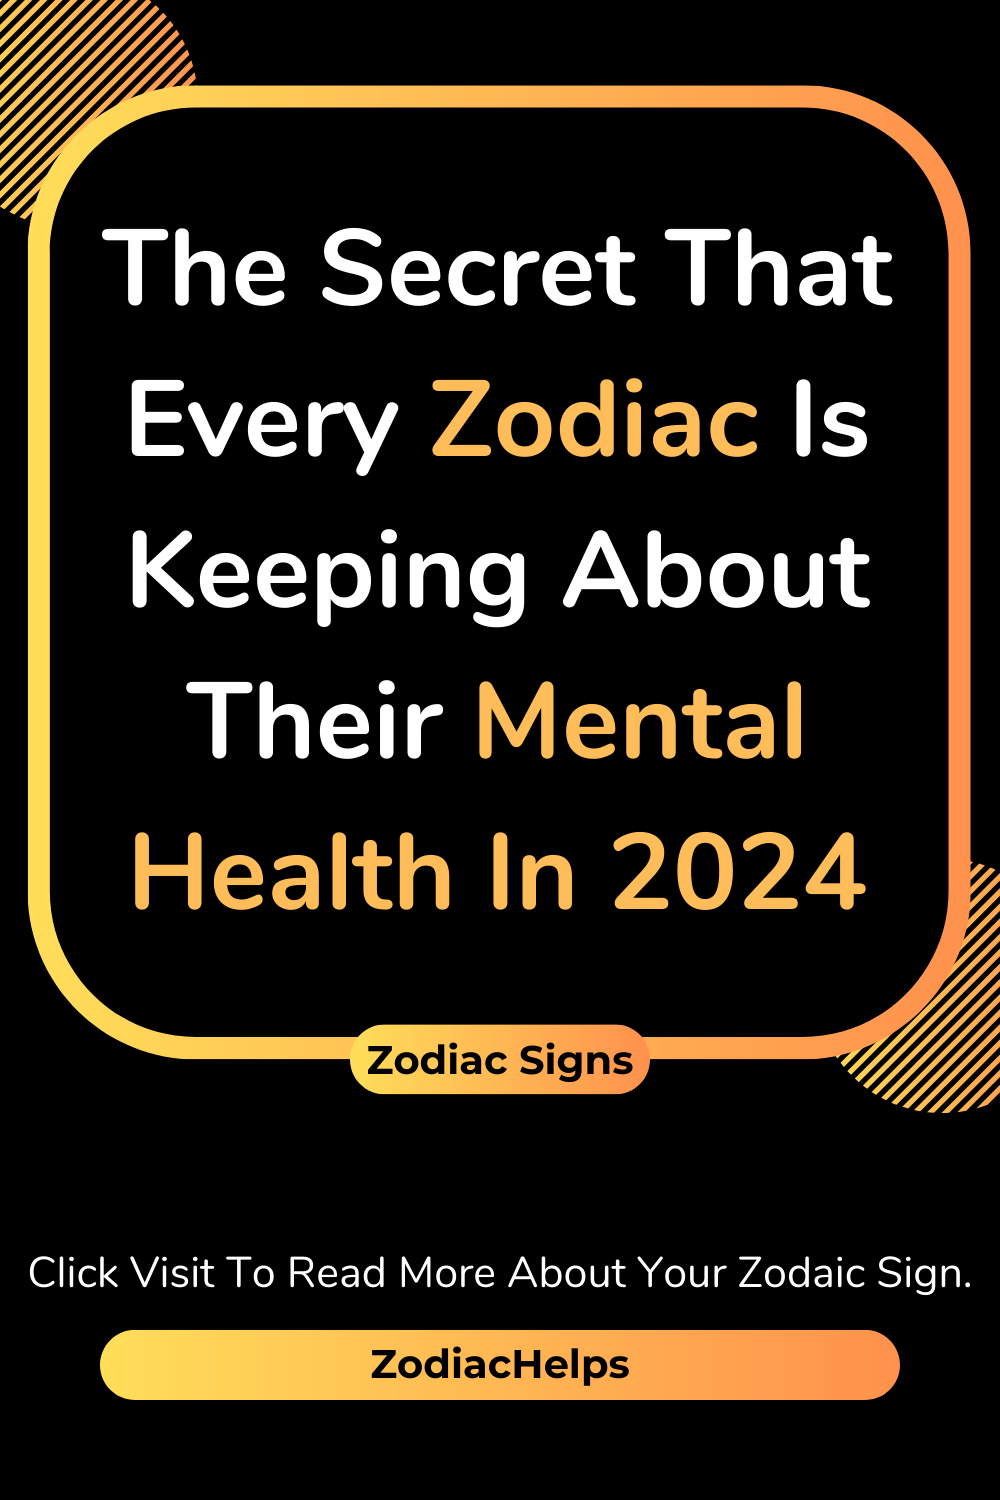 The Secret That Every Zodiac Is Keeping About Their Mental Health In 2024